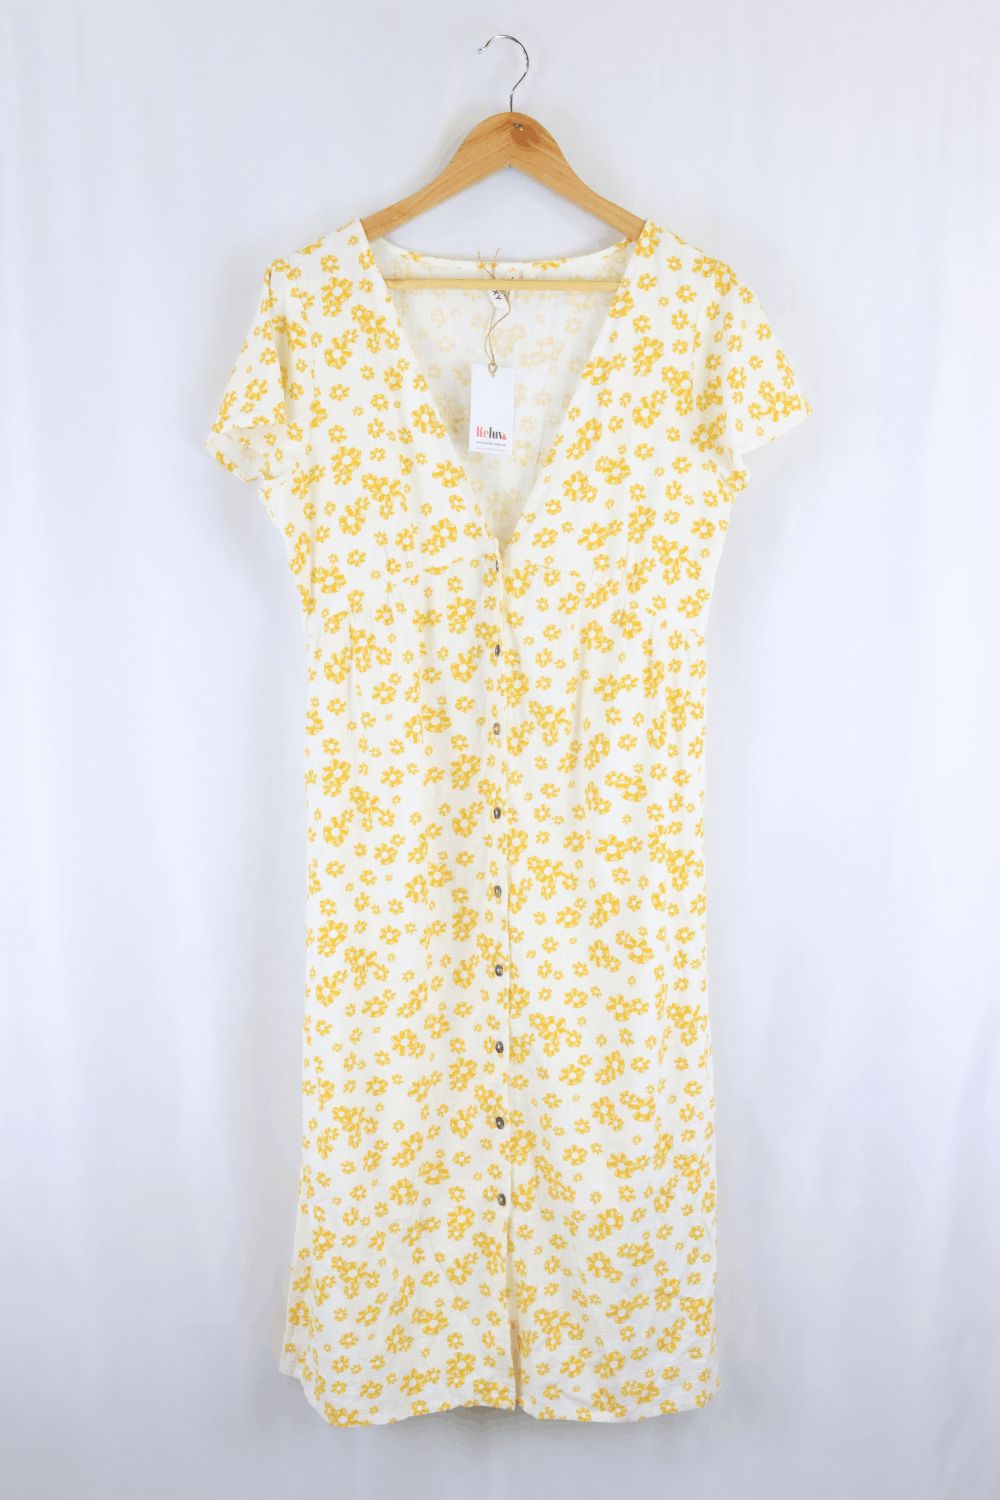 Roxy Yellow And White Floral Dress M